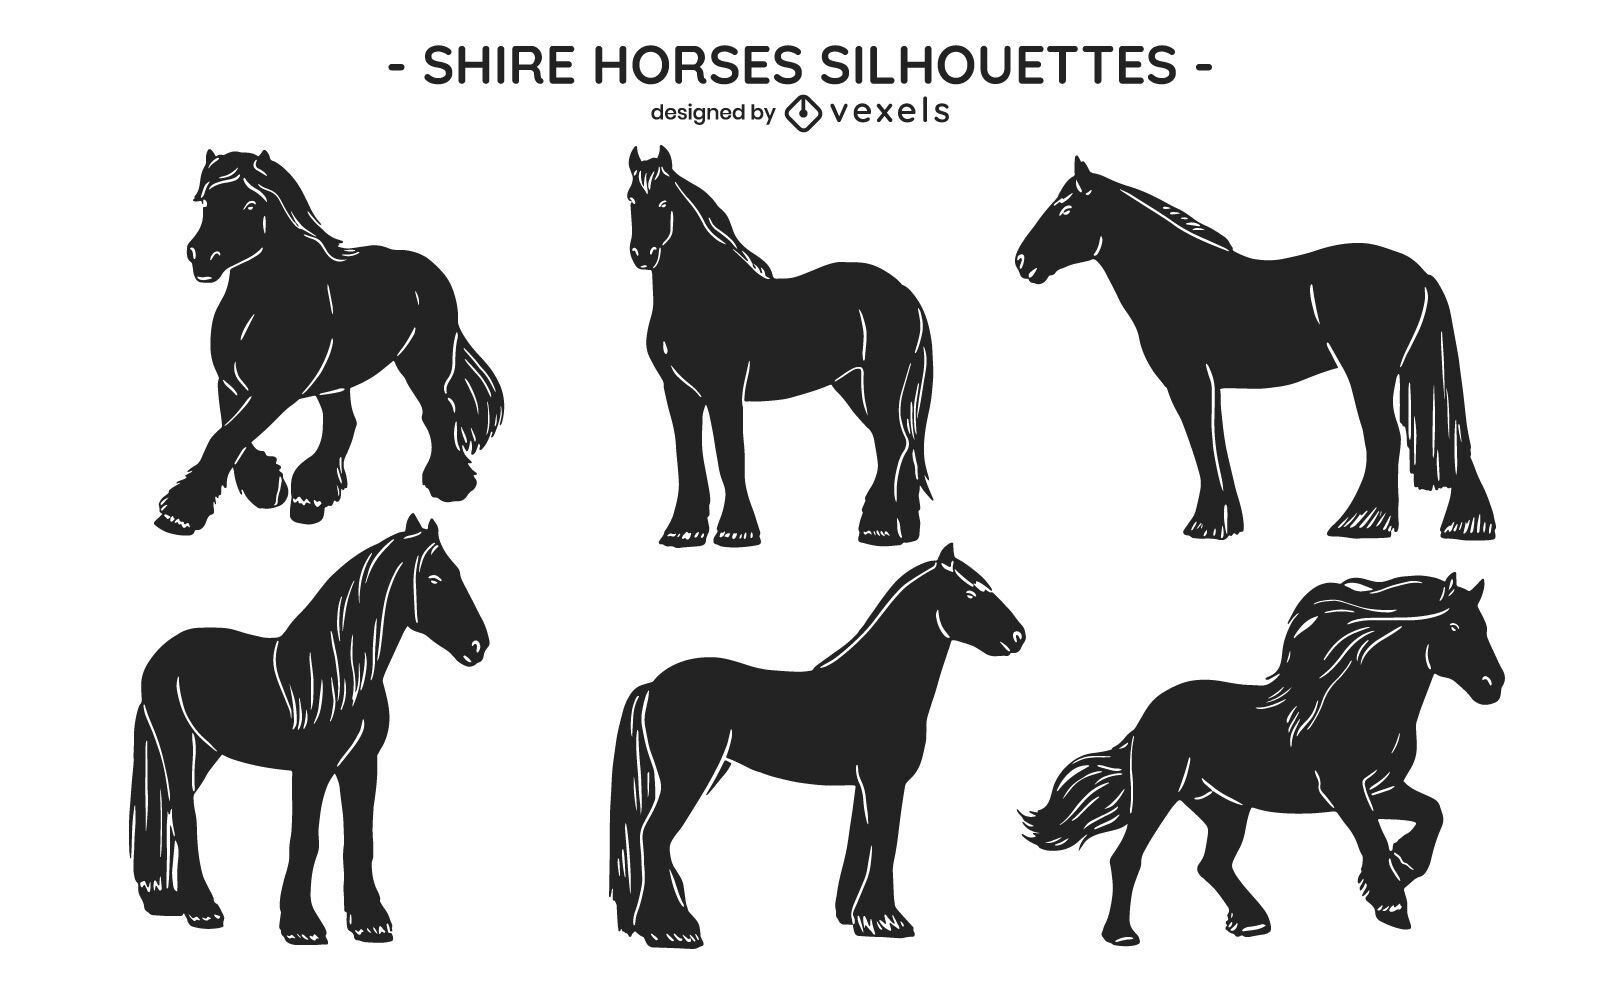 Some horse sketches : r/drawing